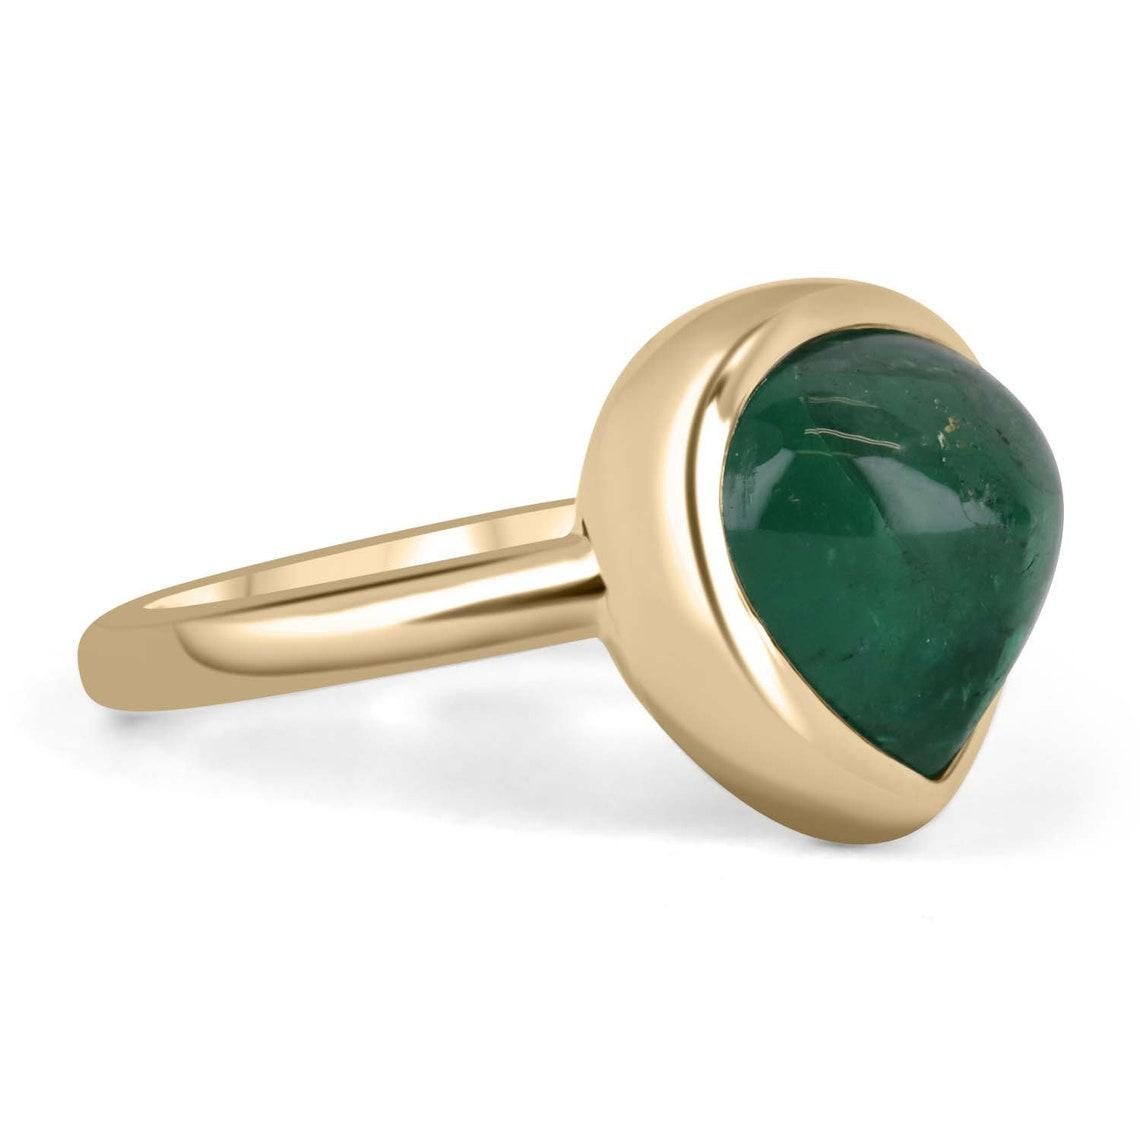 Displayed is a cabochon cut, chunky pear-shaped emerald bezel ring in 14K yellow gold. This gorgeous solitaire ring carries a full 5.56-carat emerald in a sleek bezel setting. The emerald has beautiful characteristics that will have you dazing into